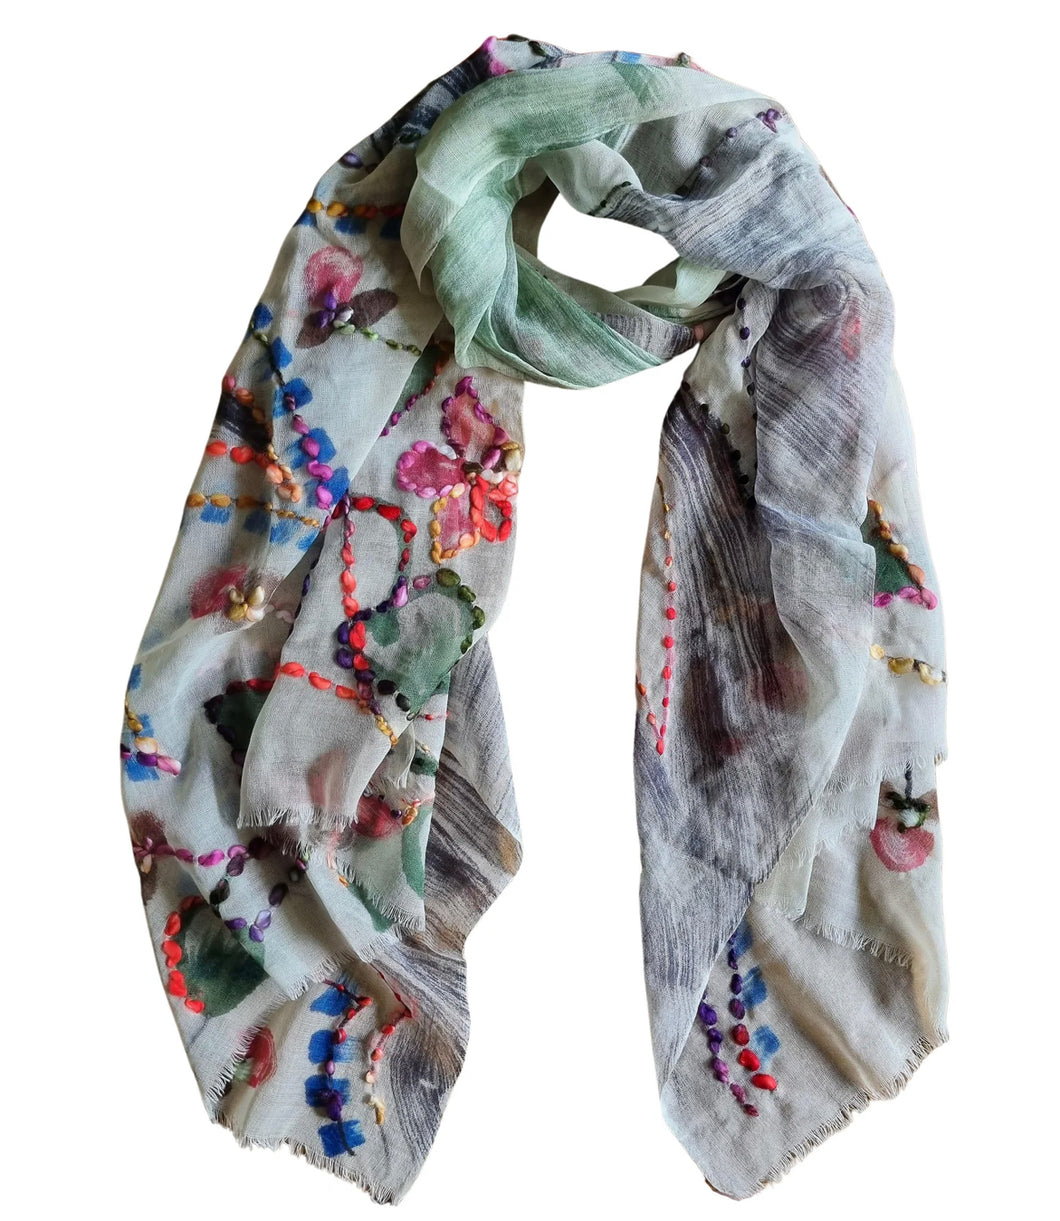 Painted and embroidered scarf light grey